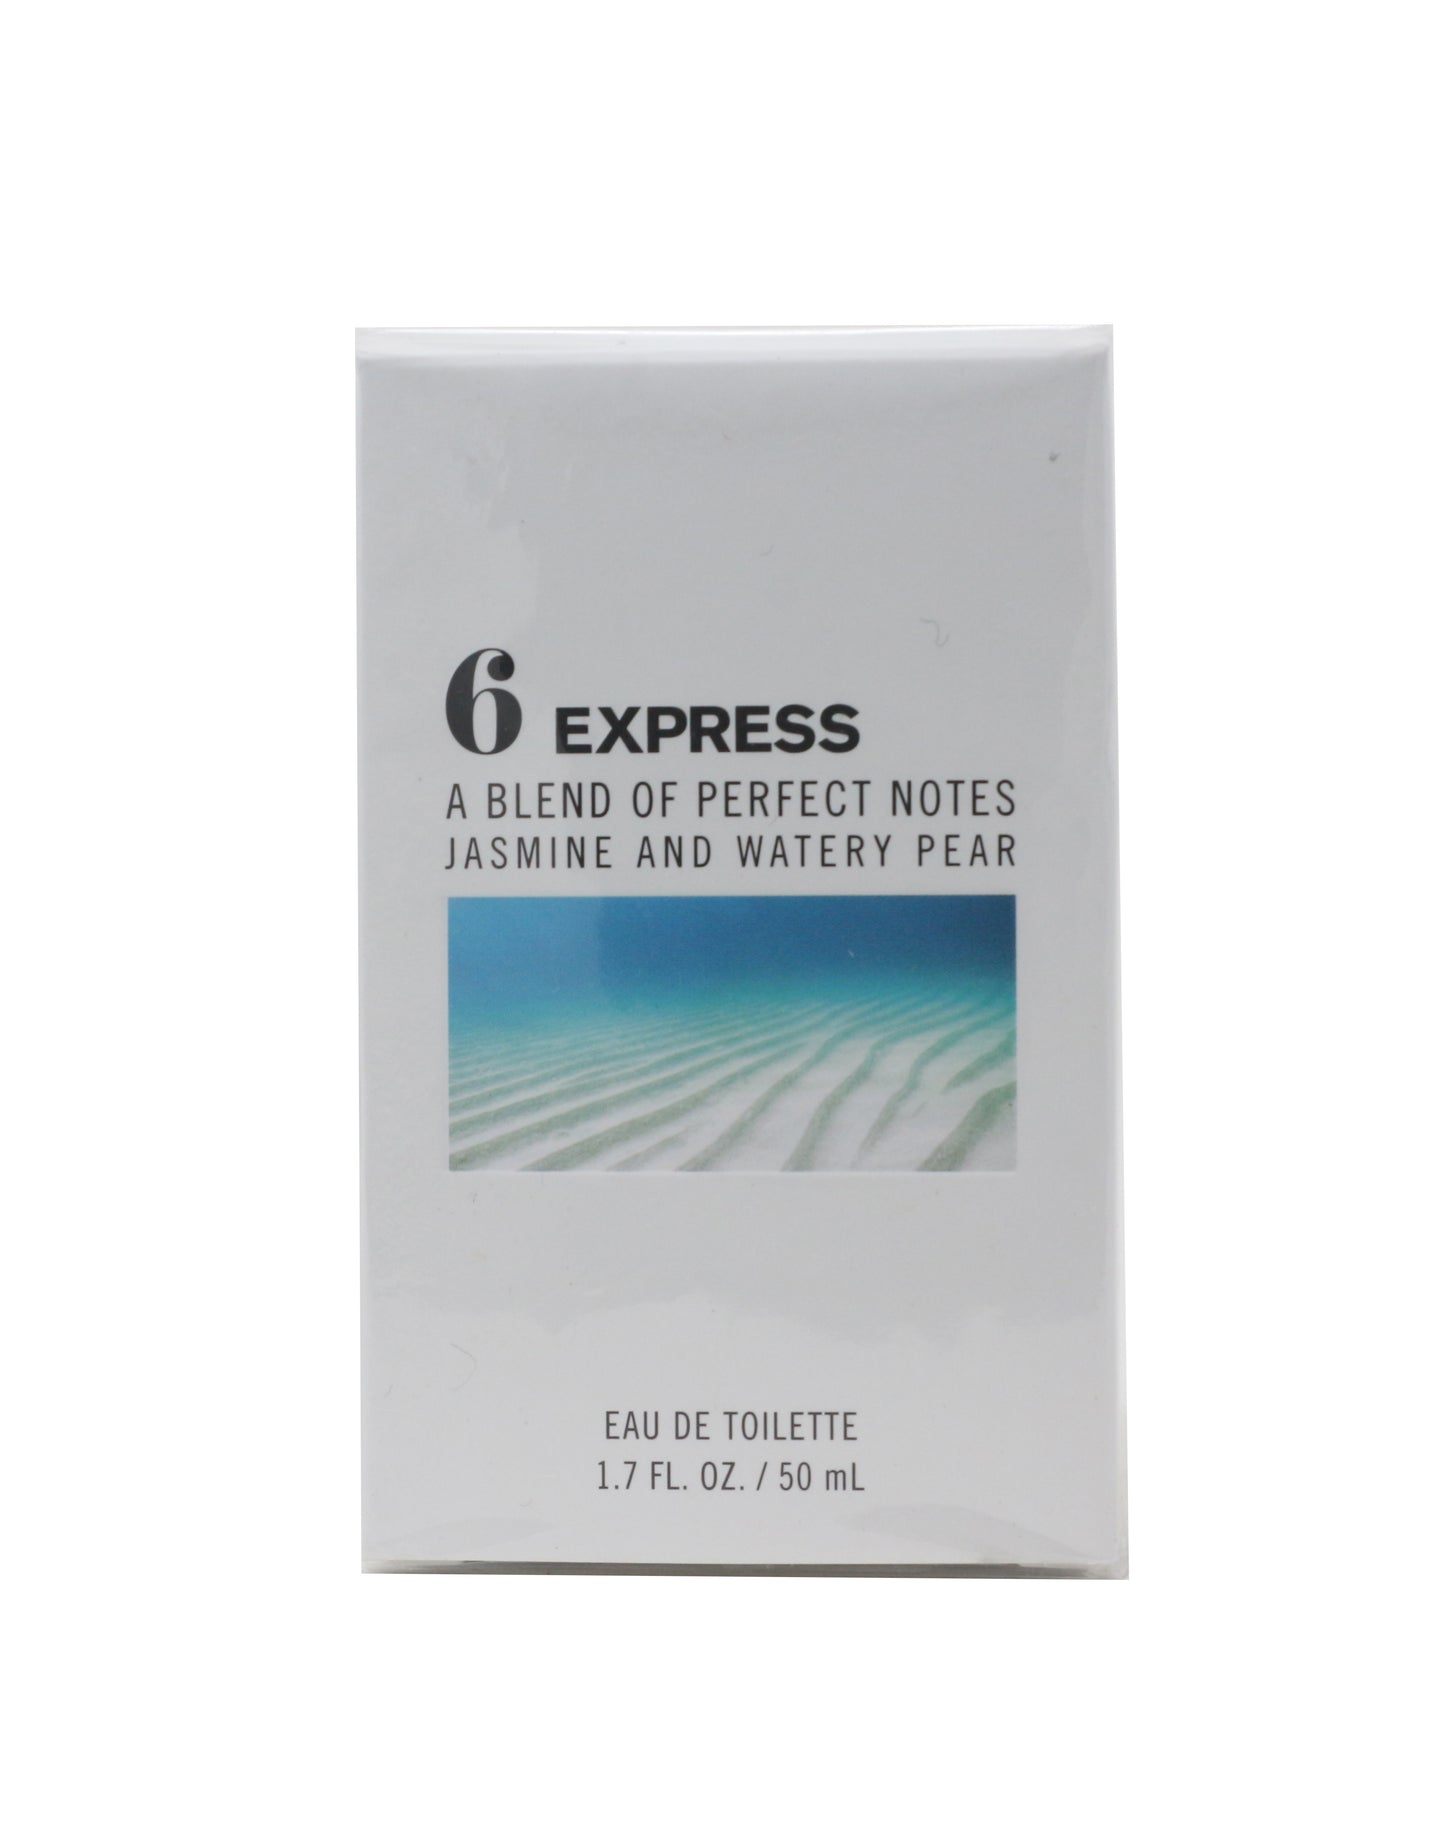 Express 6 A Blend Of Perfect Notes Jasmine And Watery Pear EDT 1.7oz New In Box